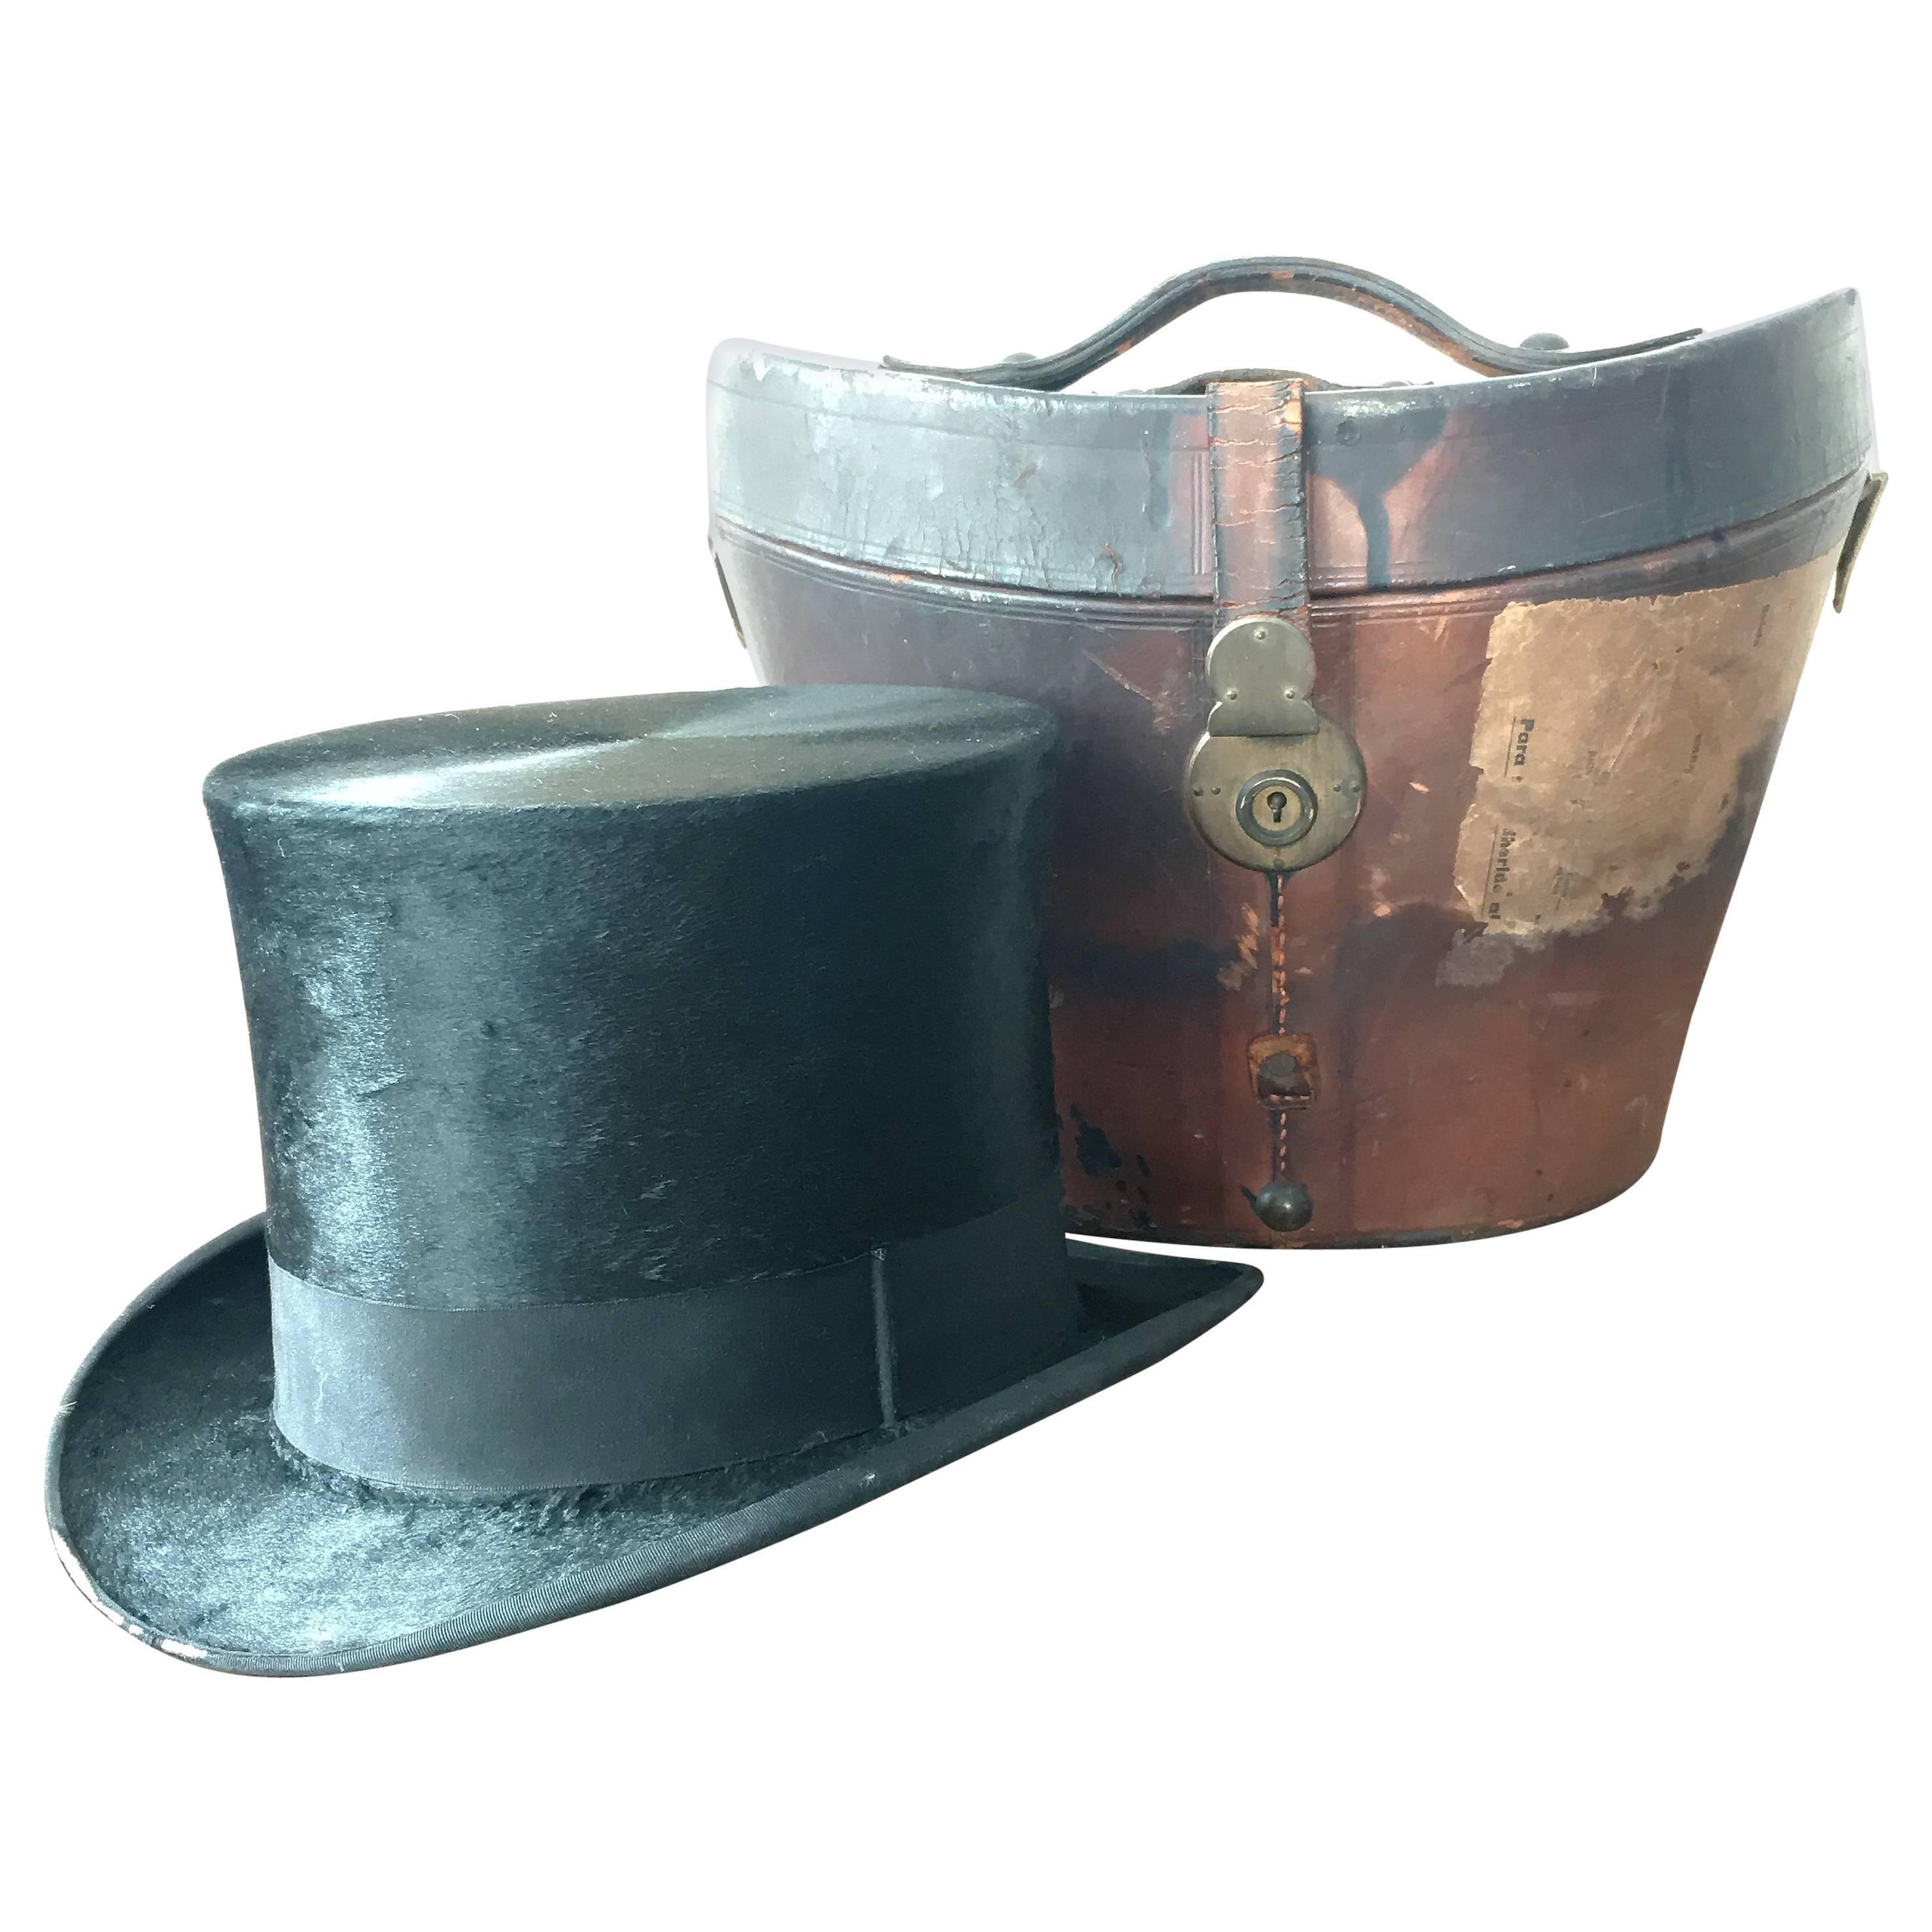 Late 19th Century "Borcher" Skin Top Hat with Box or Suitcase